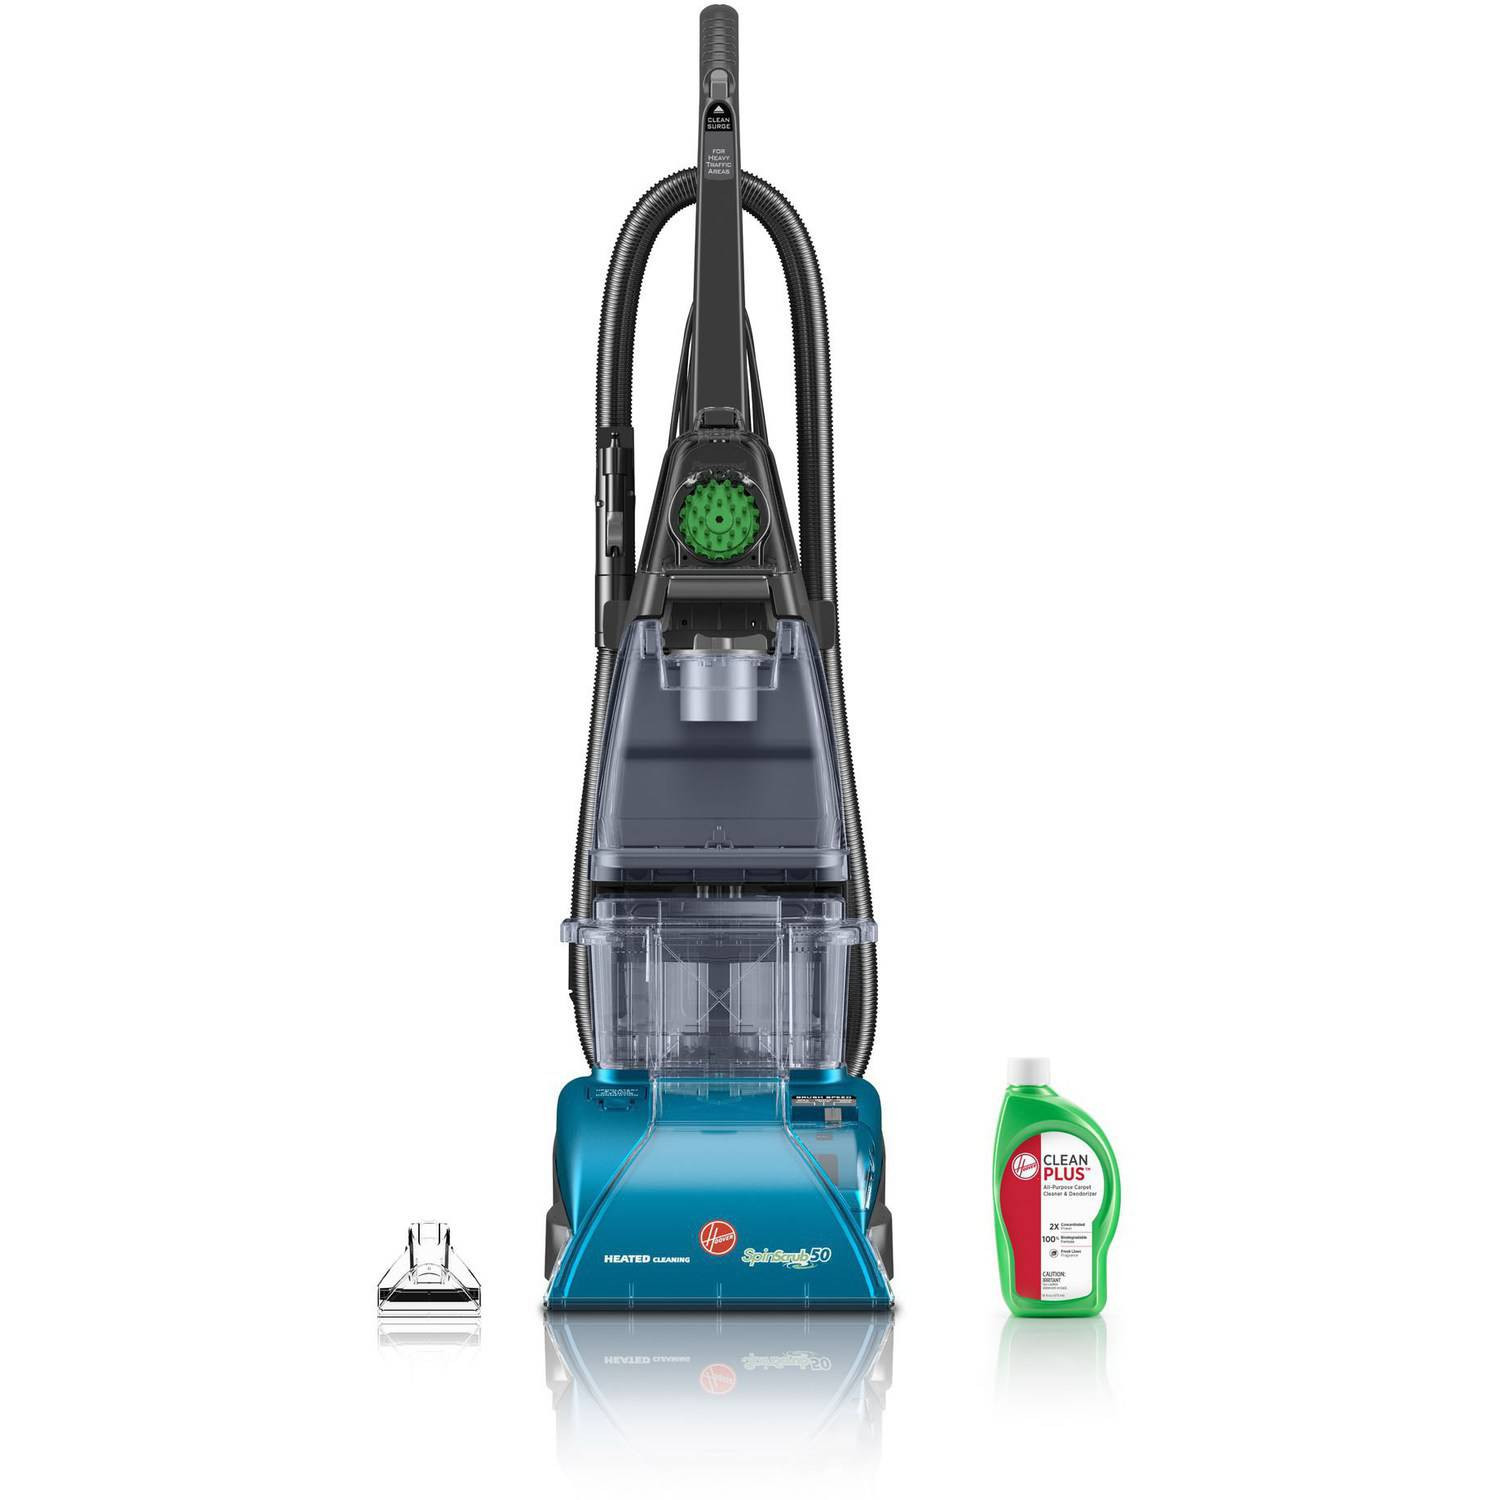 15 Lovely Hoover Hardwood Floor Cleaning Machine 2024 free download hoover hardwood floor cleaning machine of hoover expert pet carpet washer detergent 128 oz ah15075 walmart com for 8ff3492b 60de 412c a7c3 d54dc4bbf4fe 1 5ab45f1a44ec8a864f9774eff8b87c11